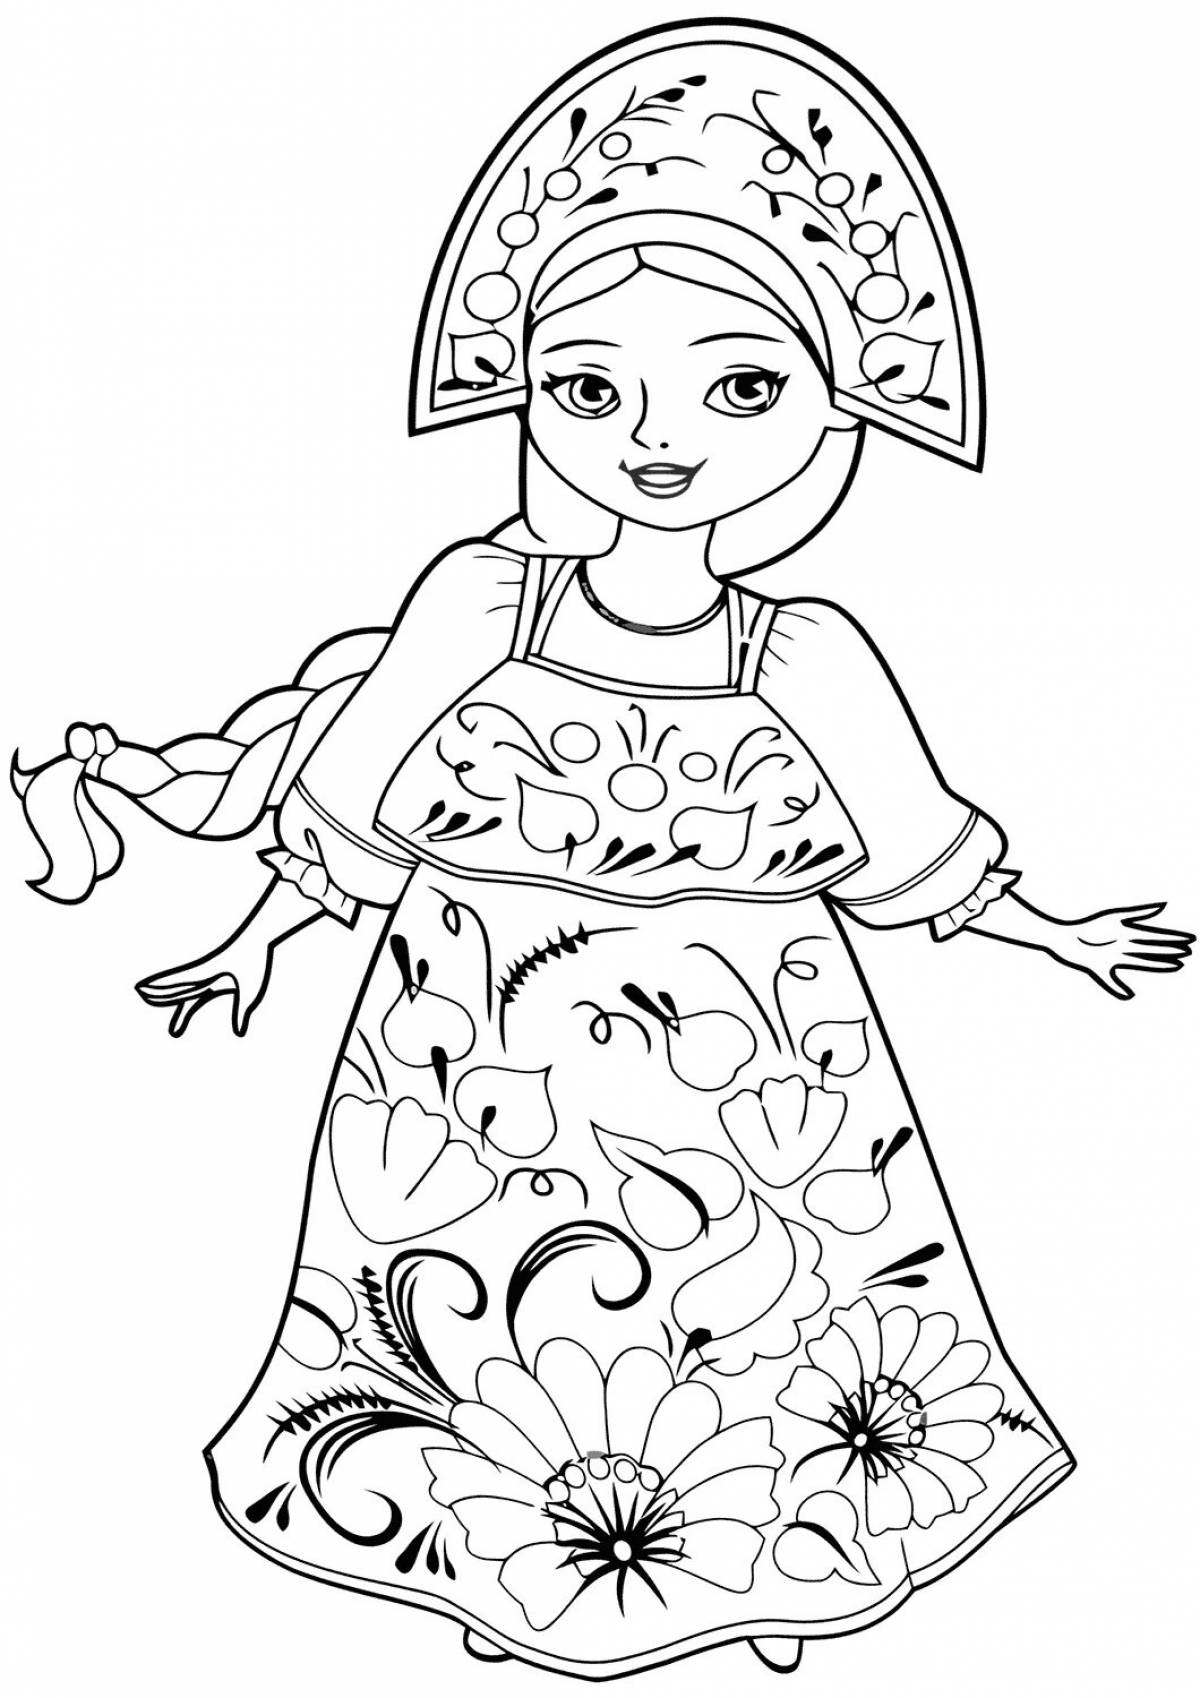 Coloring page mysterious Russian beauty